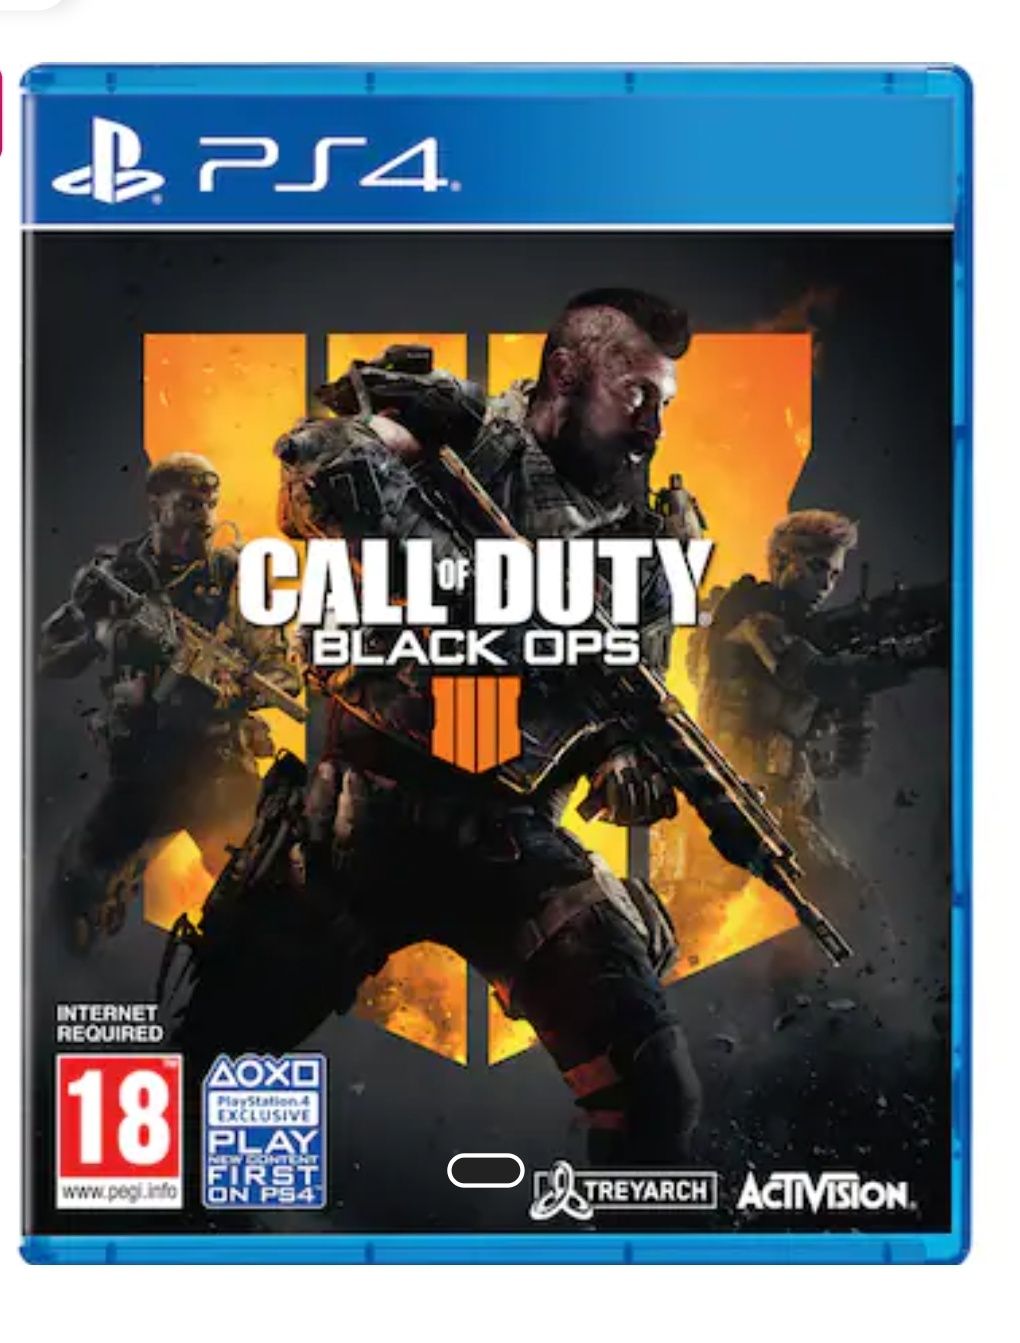 Call of Duty ~~Black ops ~~ PlayStation 4